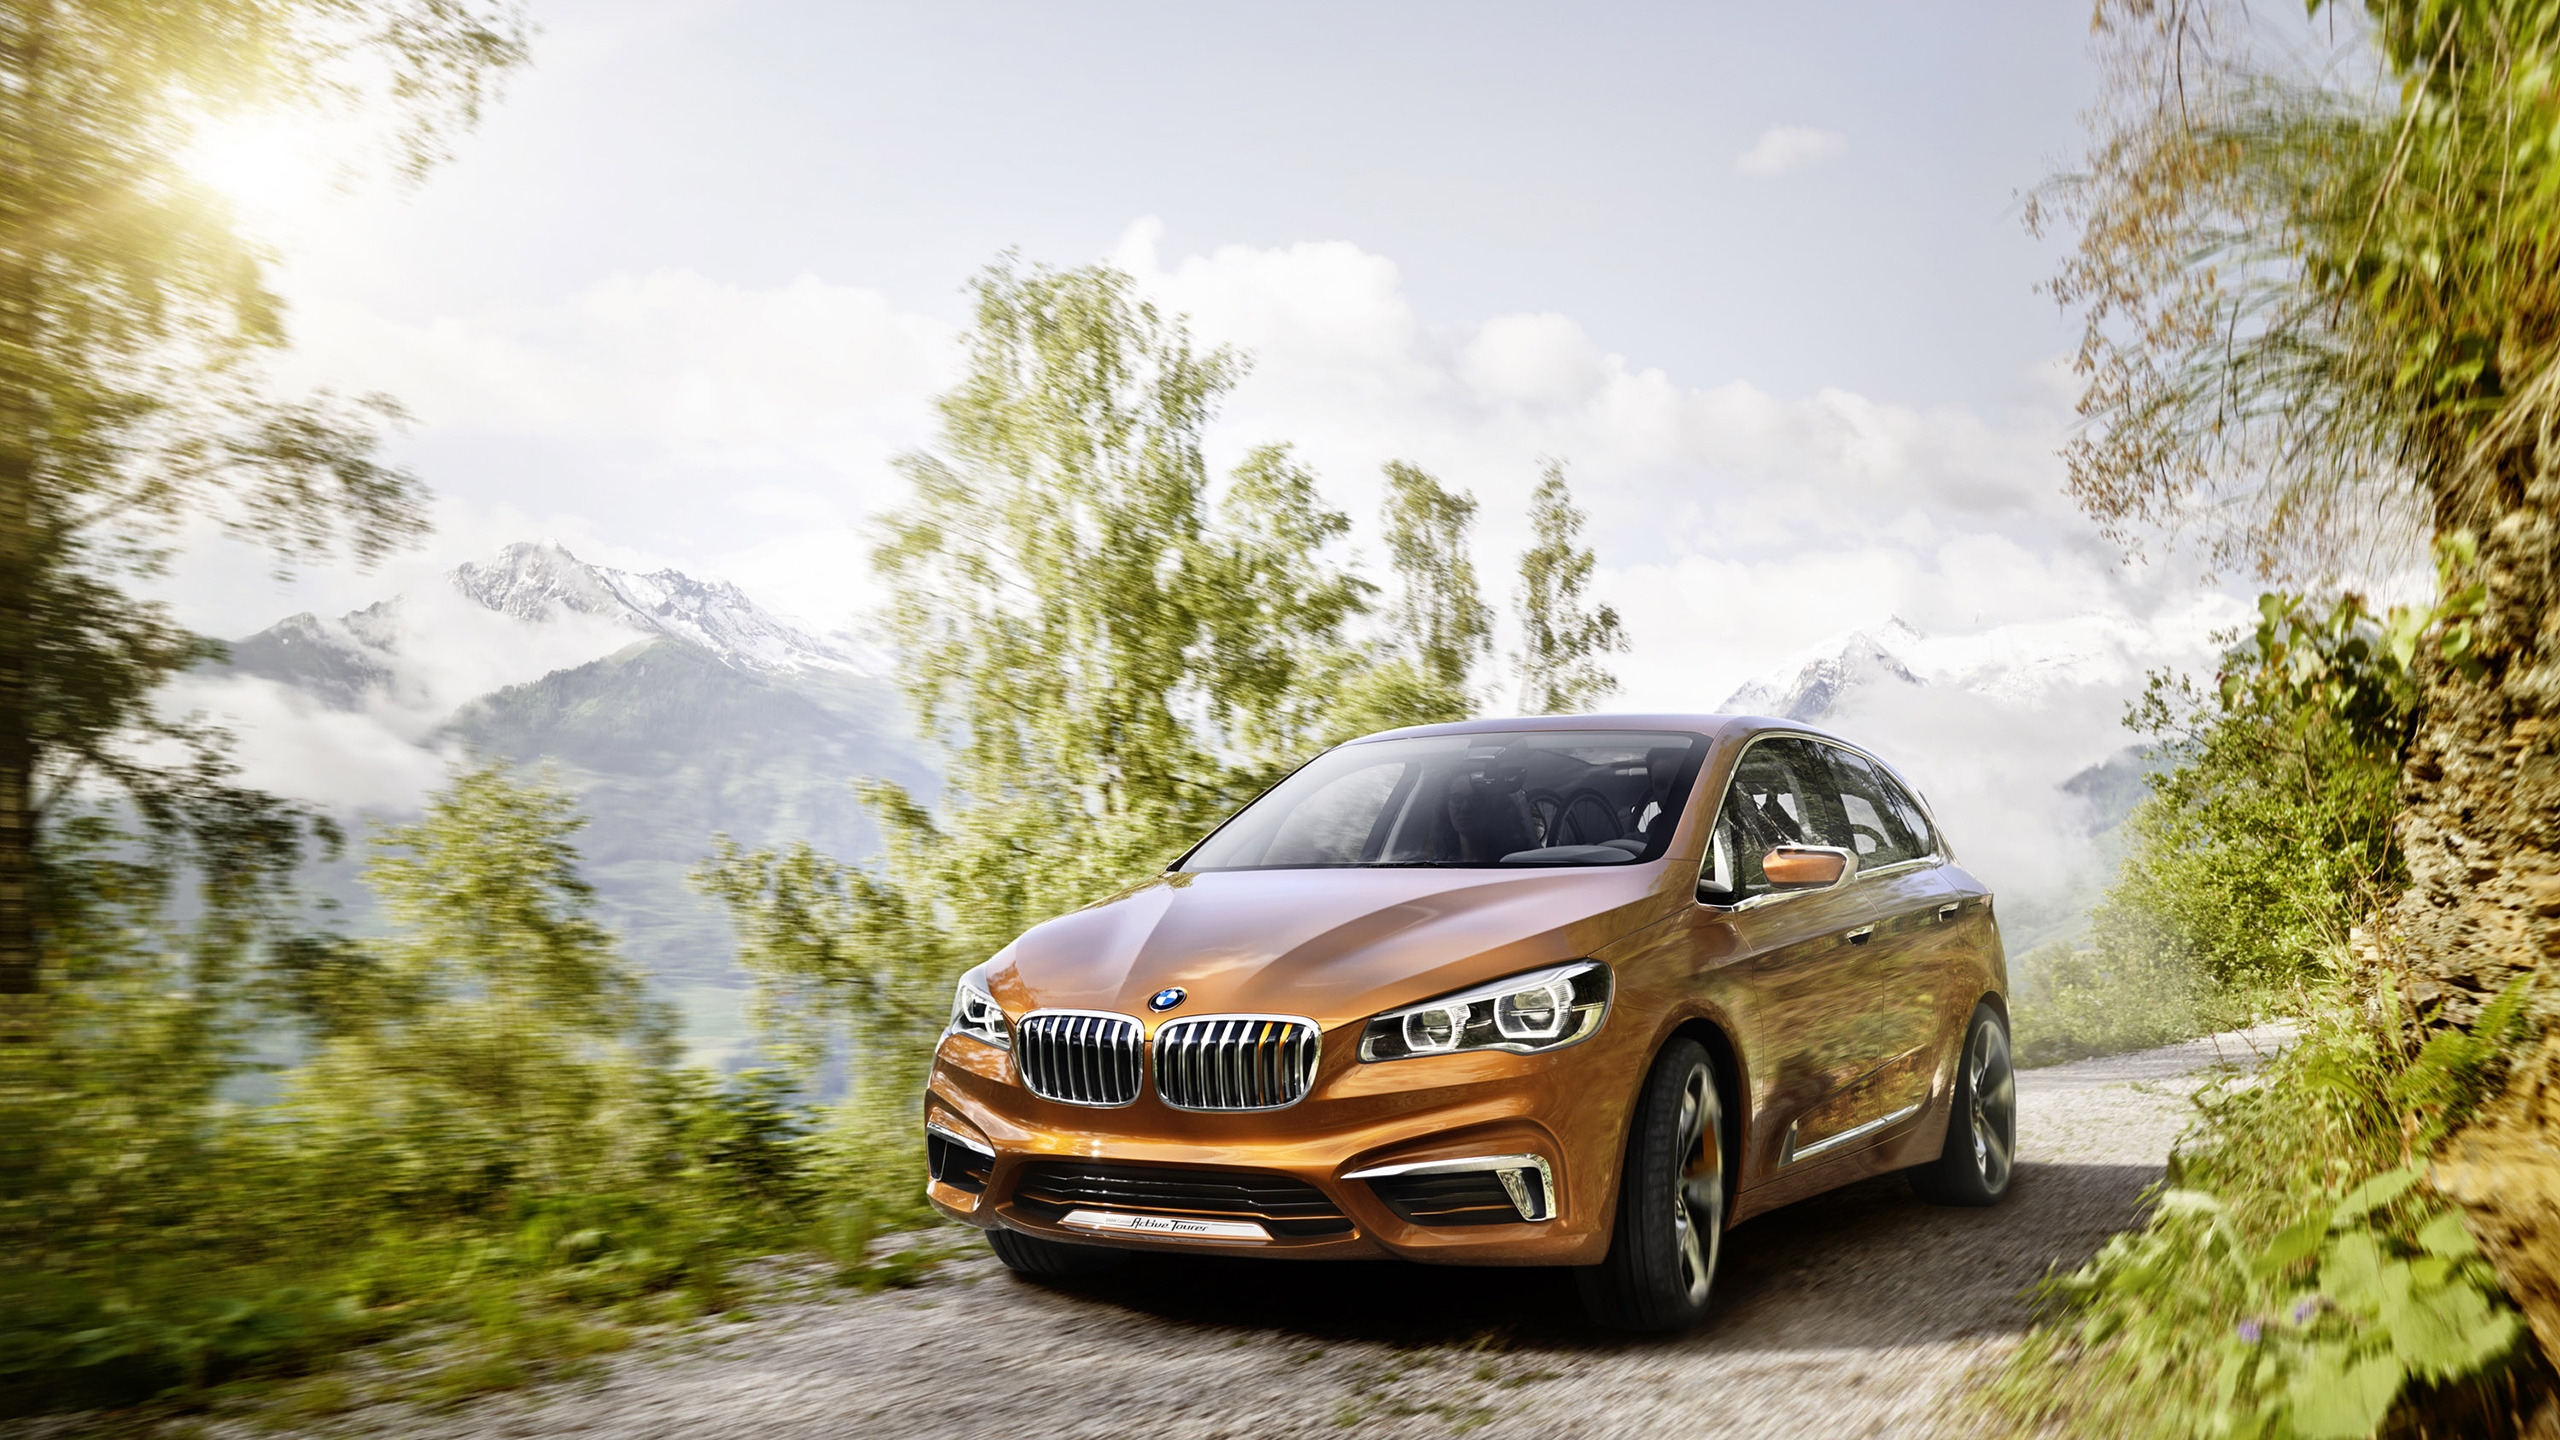 Beautiful BMW Concept Active Tourer for 2560x1440 HDTV resolution